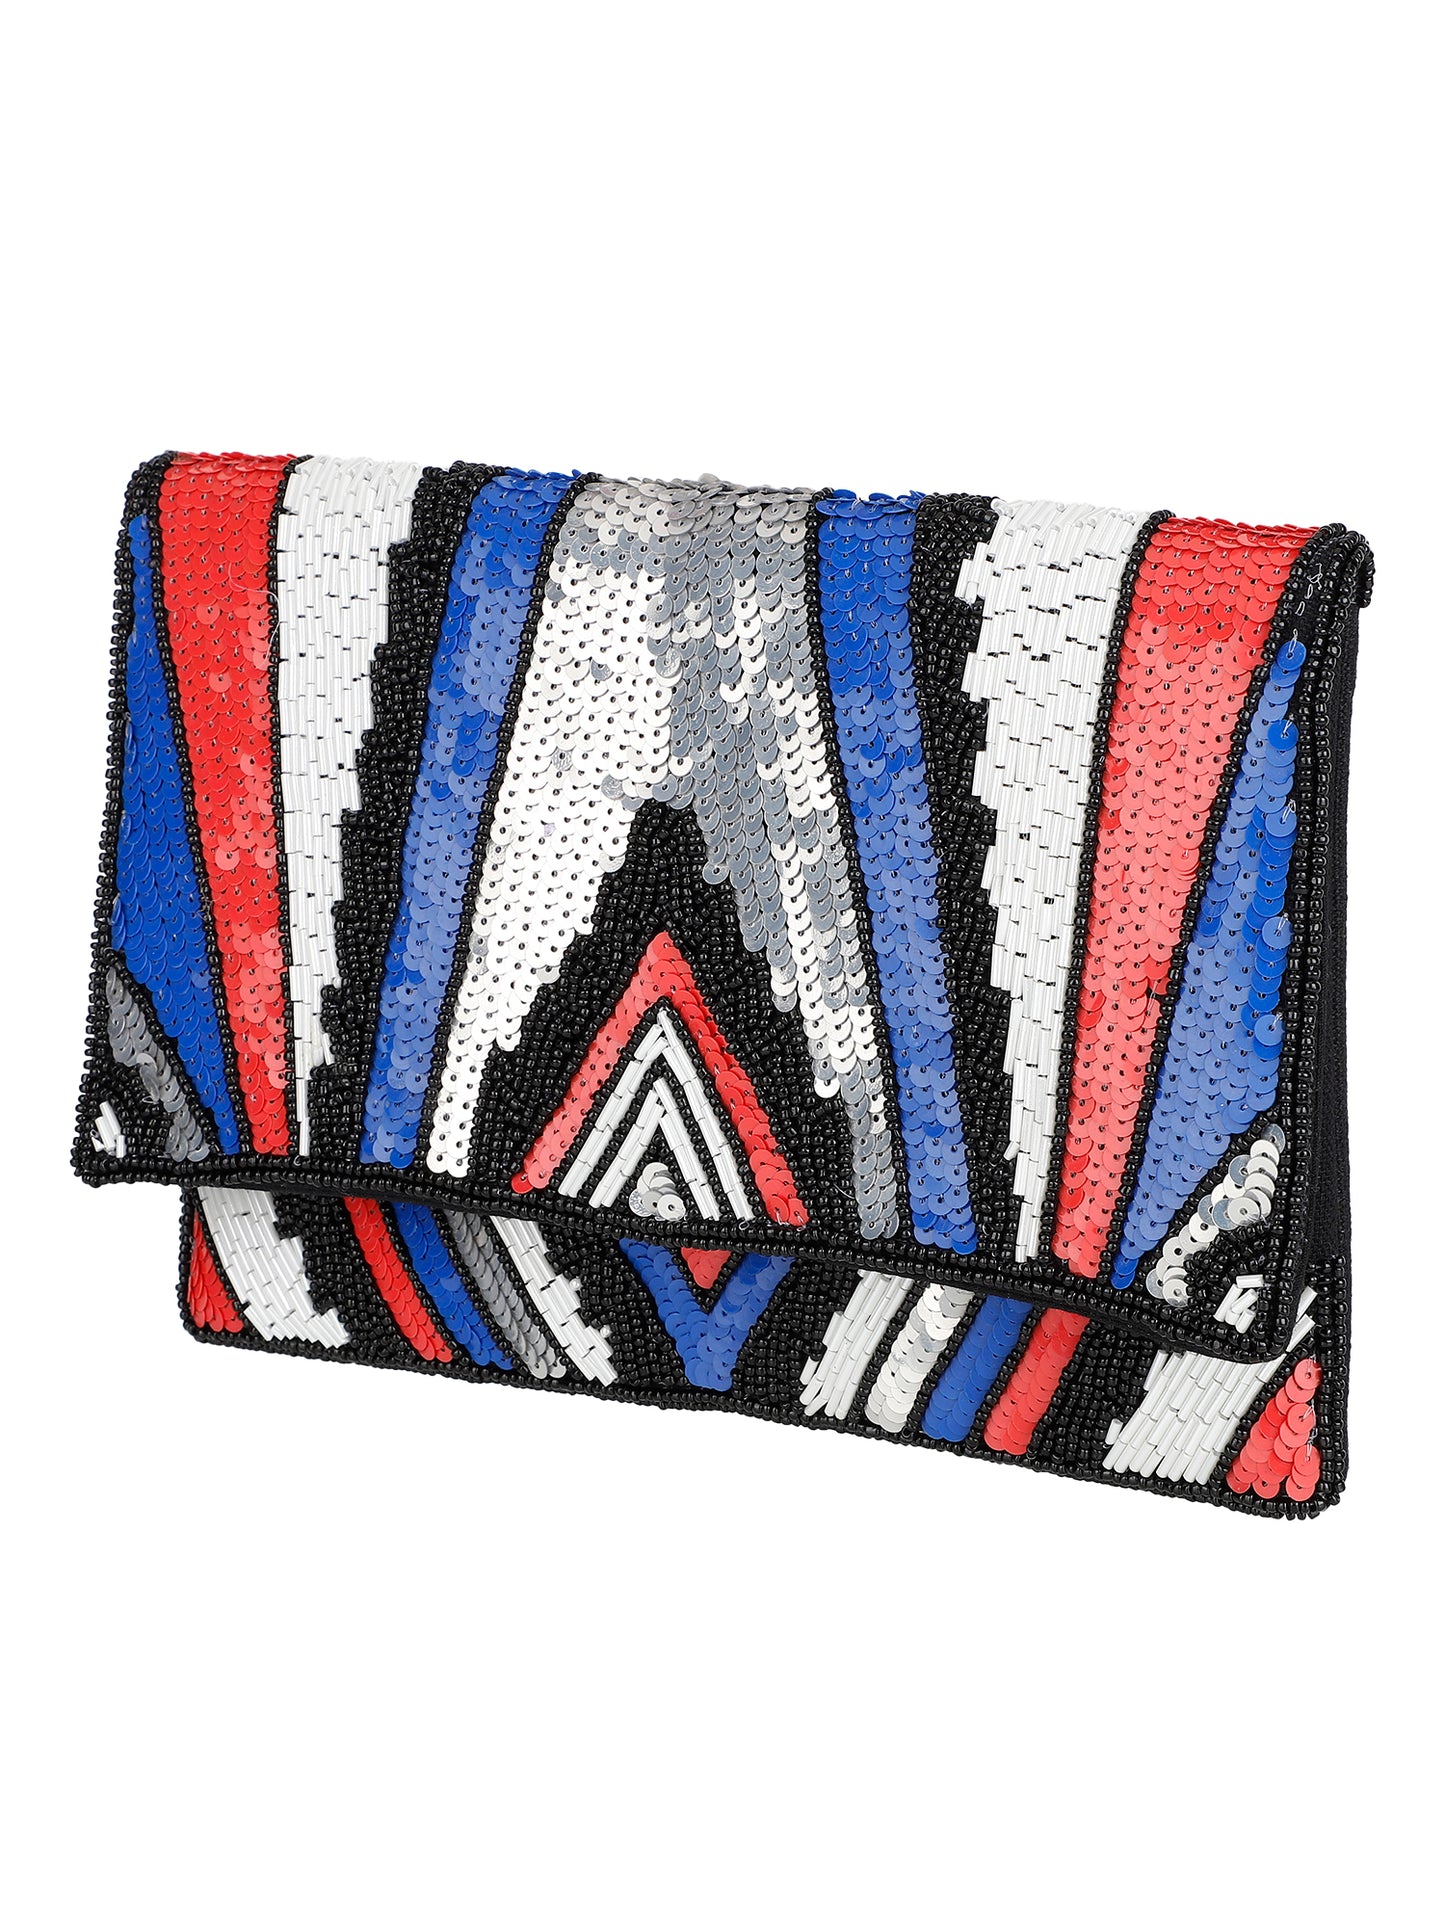 Embroidered Multicolored Clutch